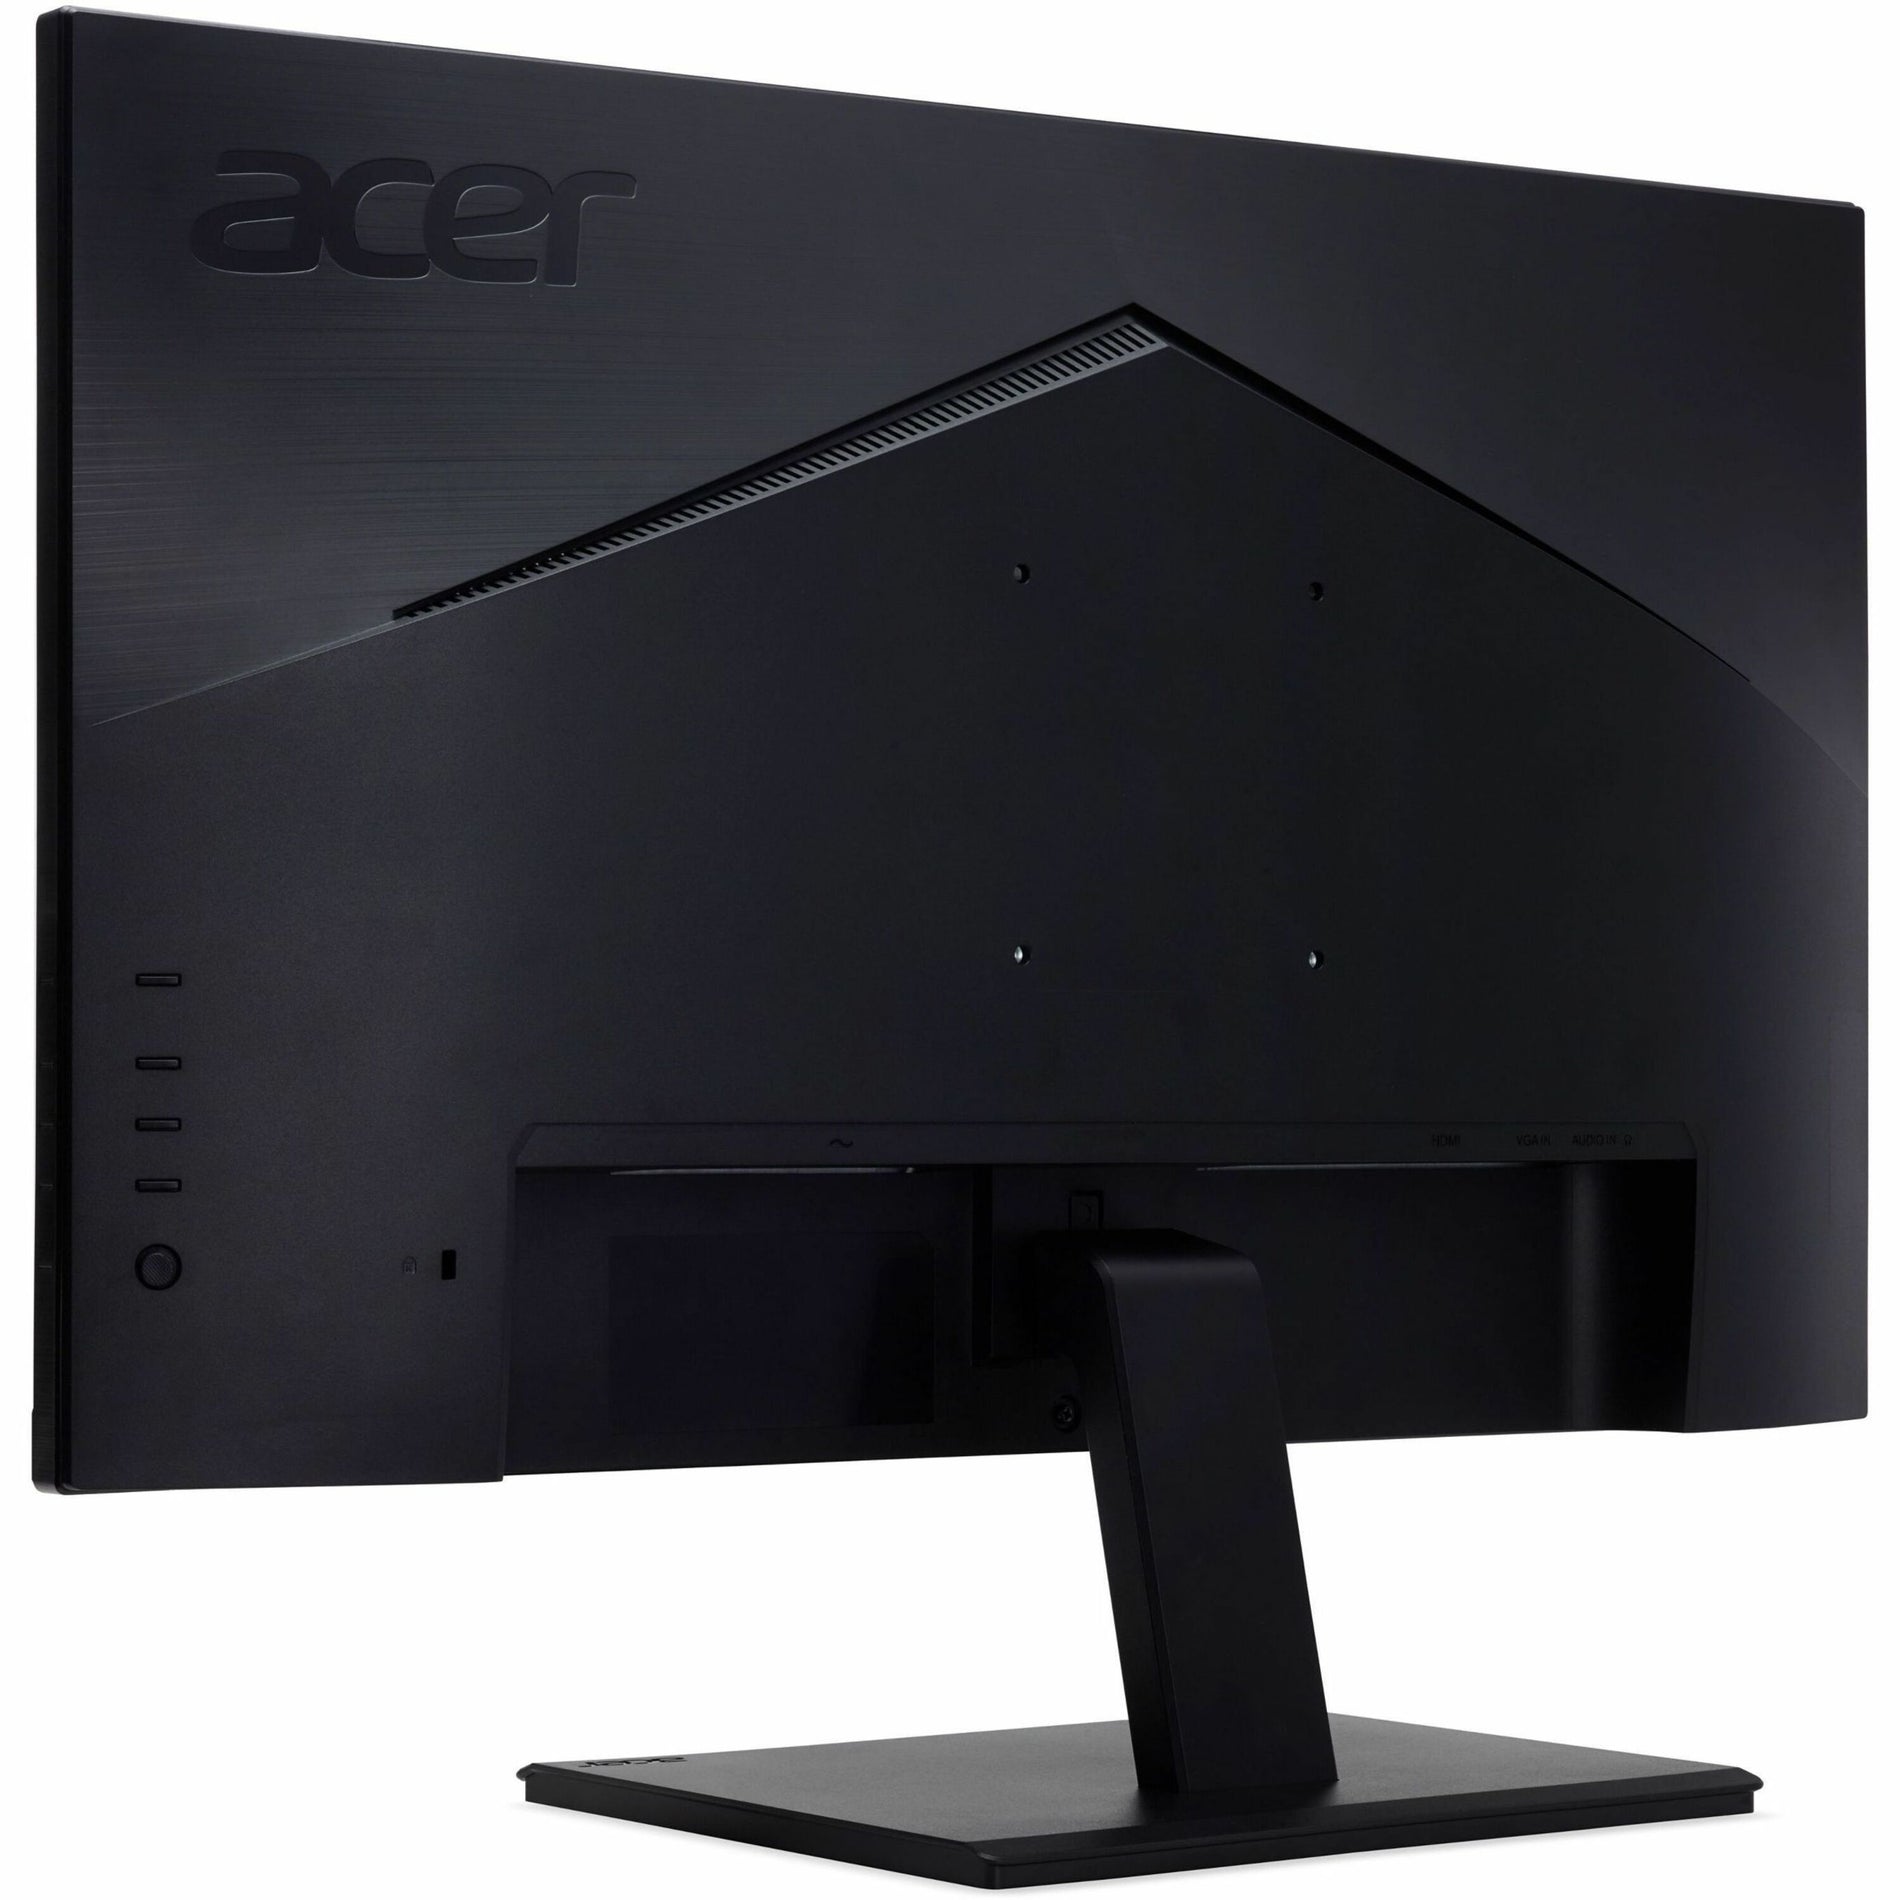 Acer UM.QV7AA.H01 V247Y H Widescreen LCD Monitor, 23.8", 4ms GTG, FreeSync, 250 Nit